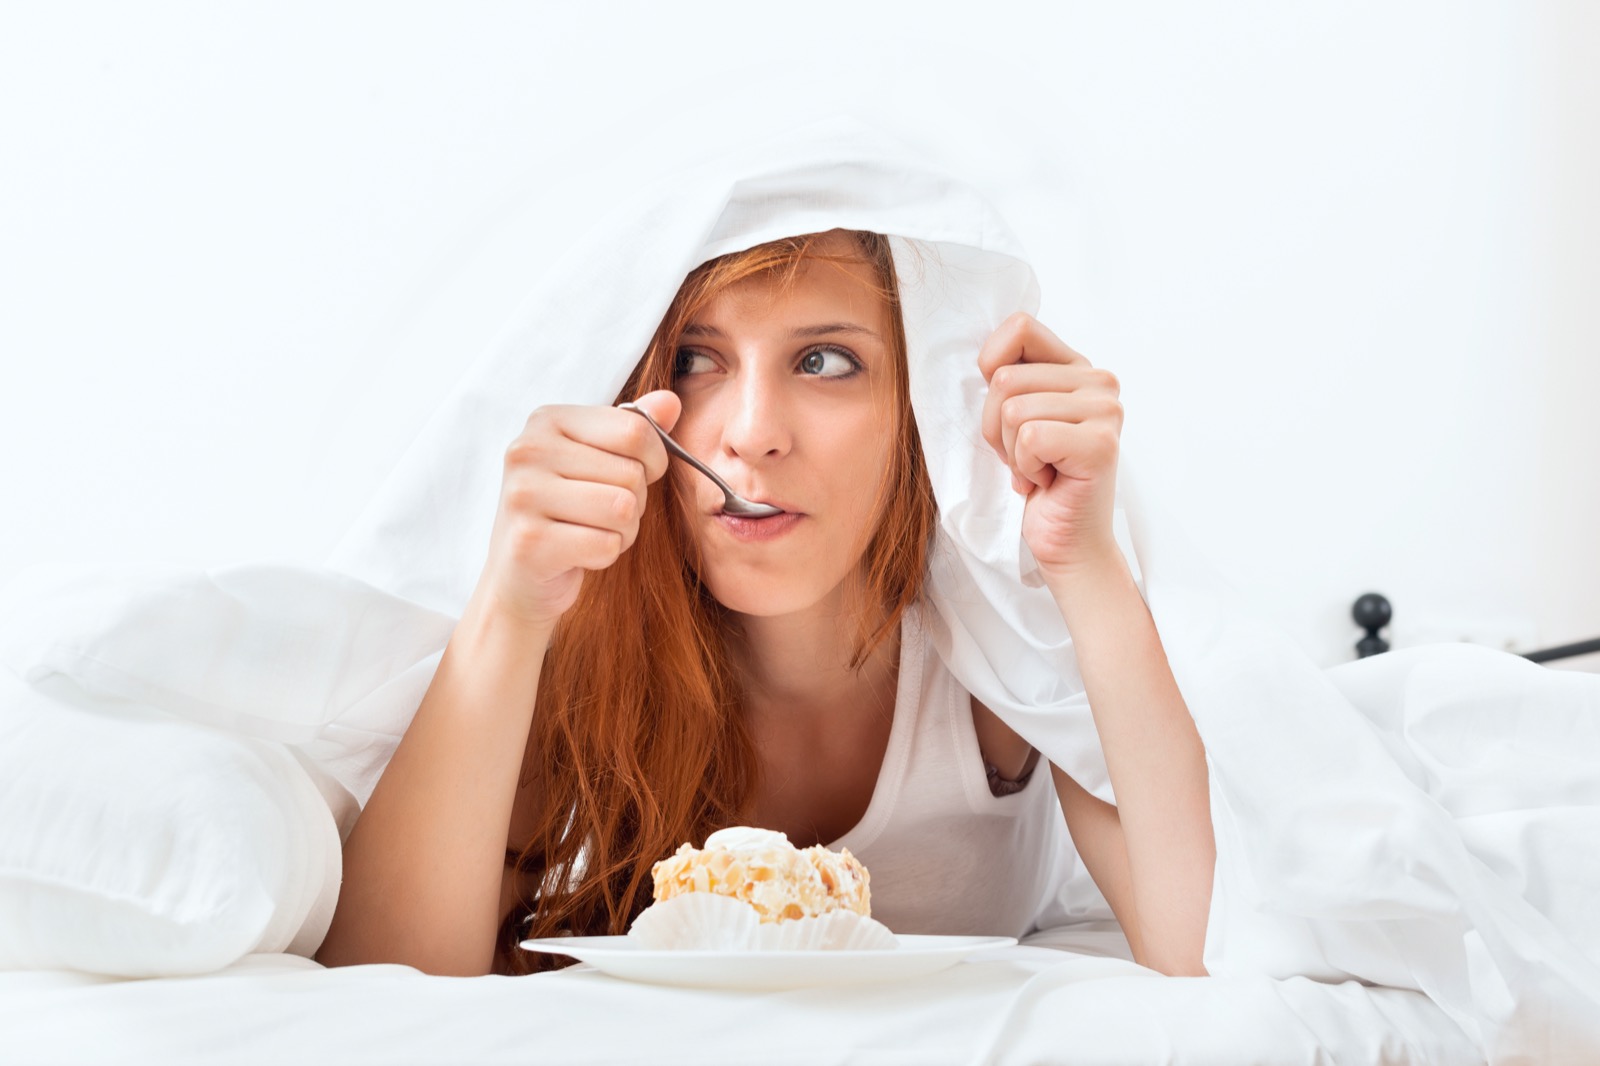 Are You Emotionally Prepared to Make Some Impossible Food Choices? Woman Having Sweet Cake At Bed